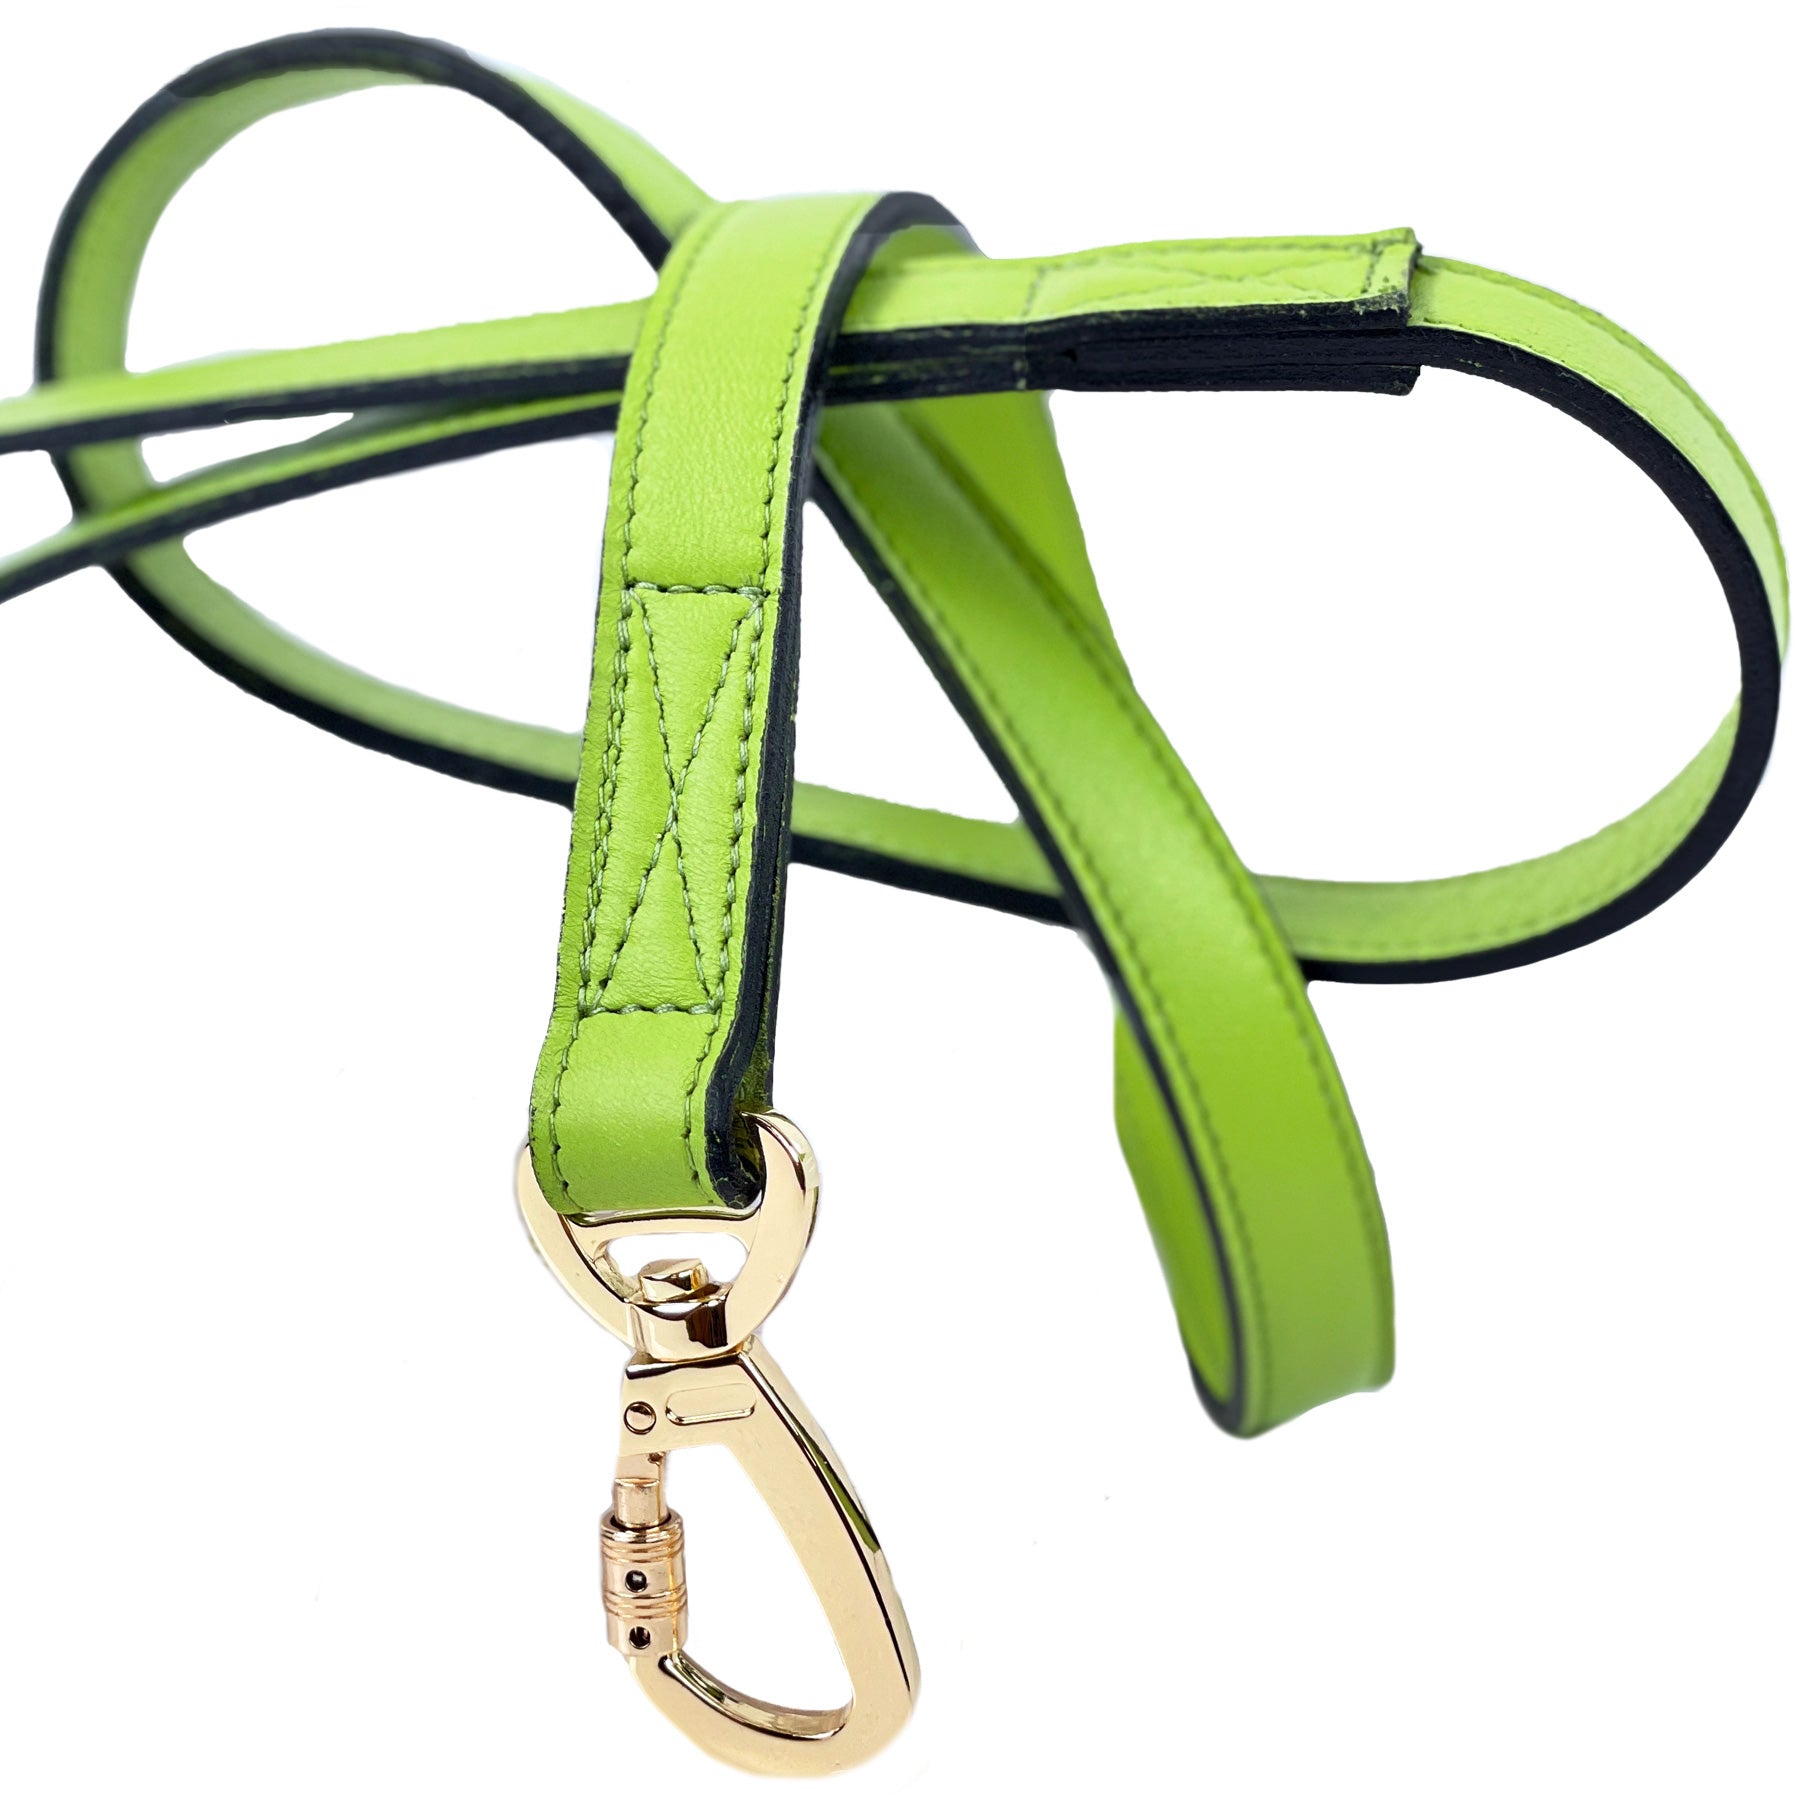 Leap Frog Dog Leash in Lime Green